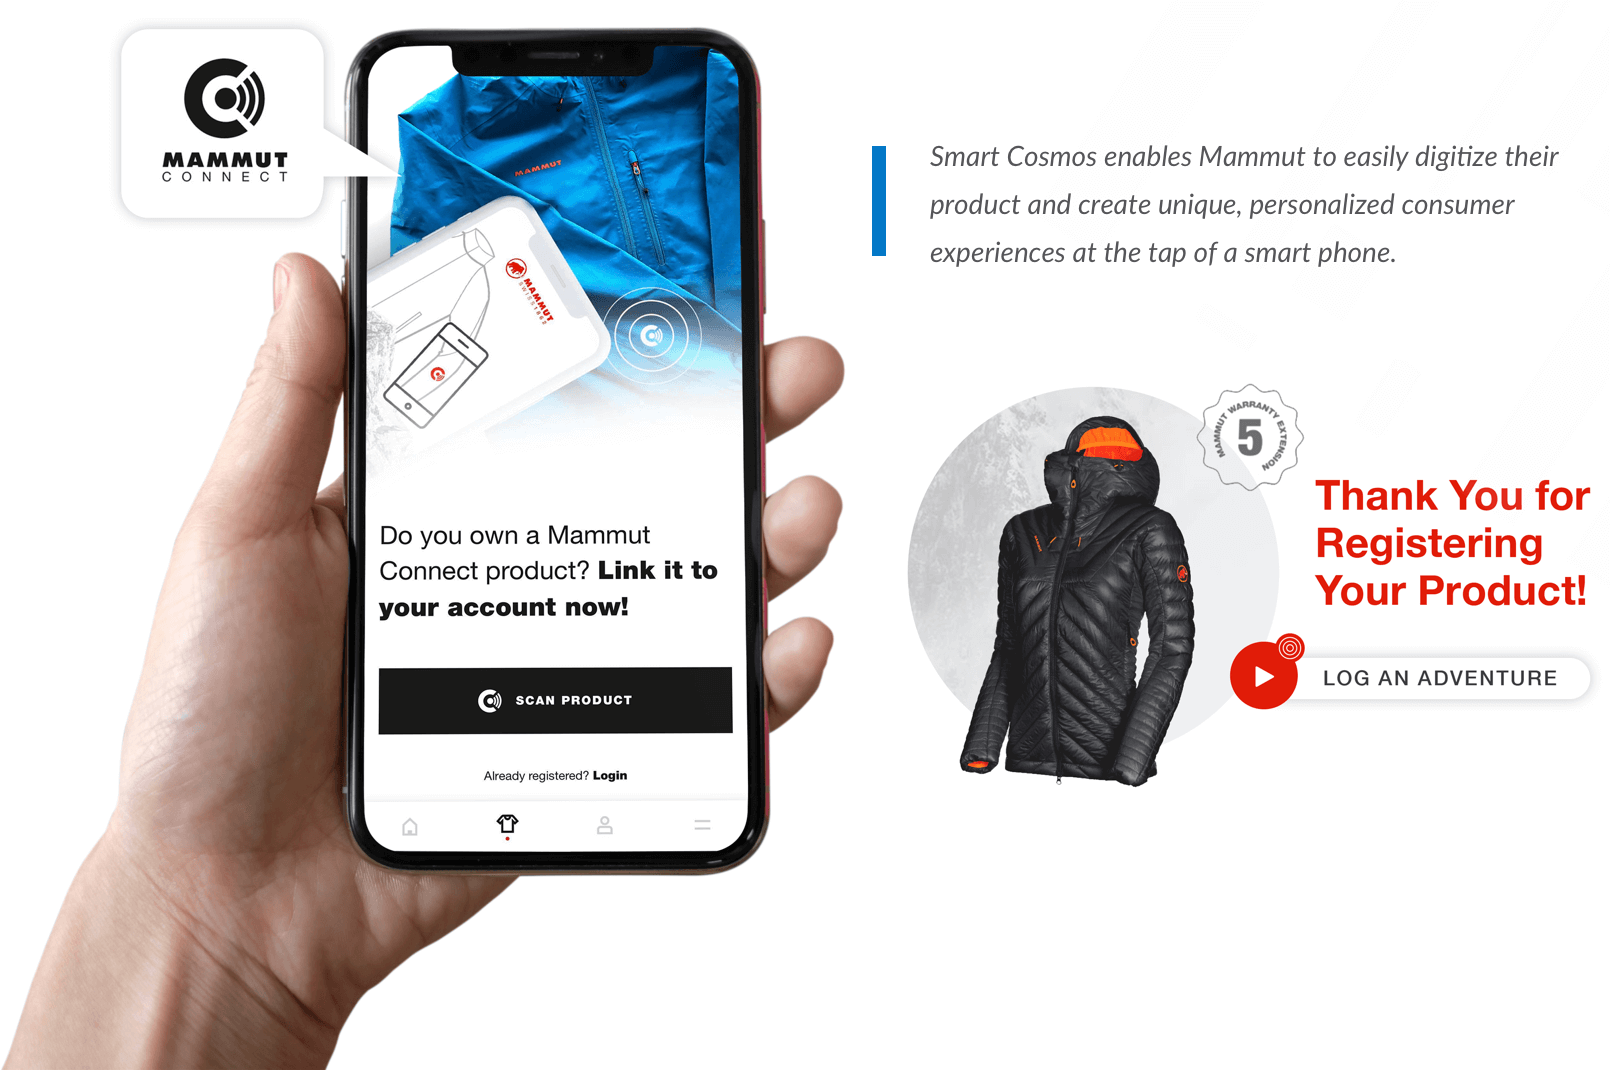 Smart Cosmos enables Mammut to easily digitize their product and create unique, personalized consumer experiences at the tap of a smart phone.